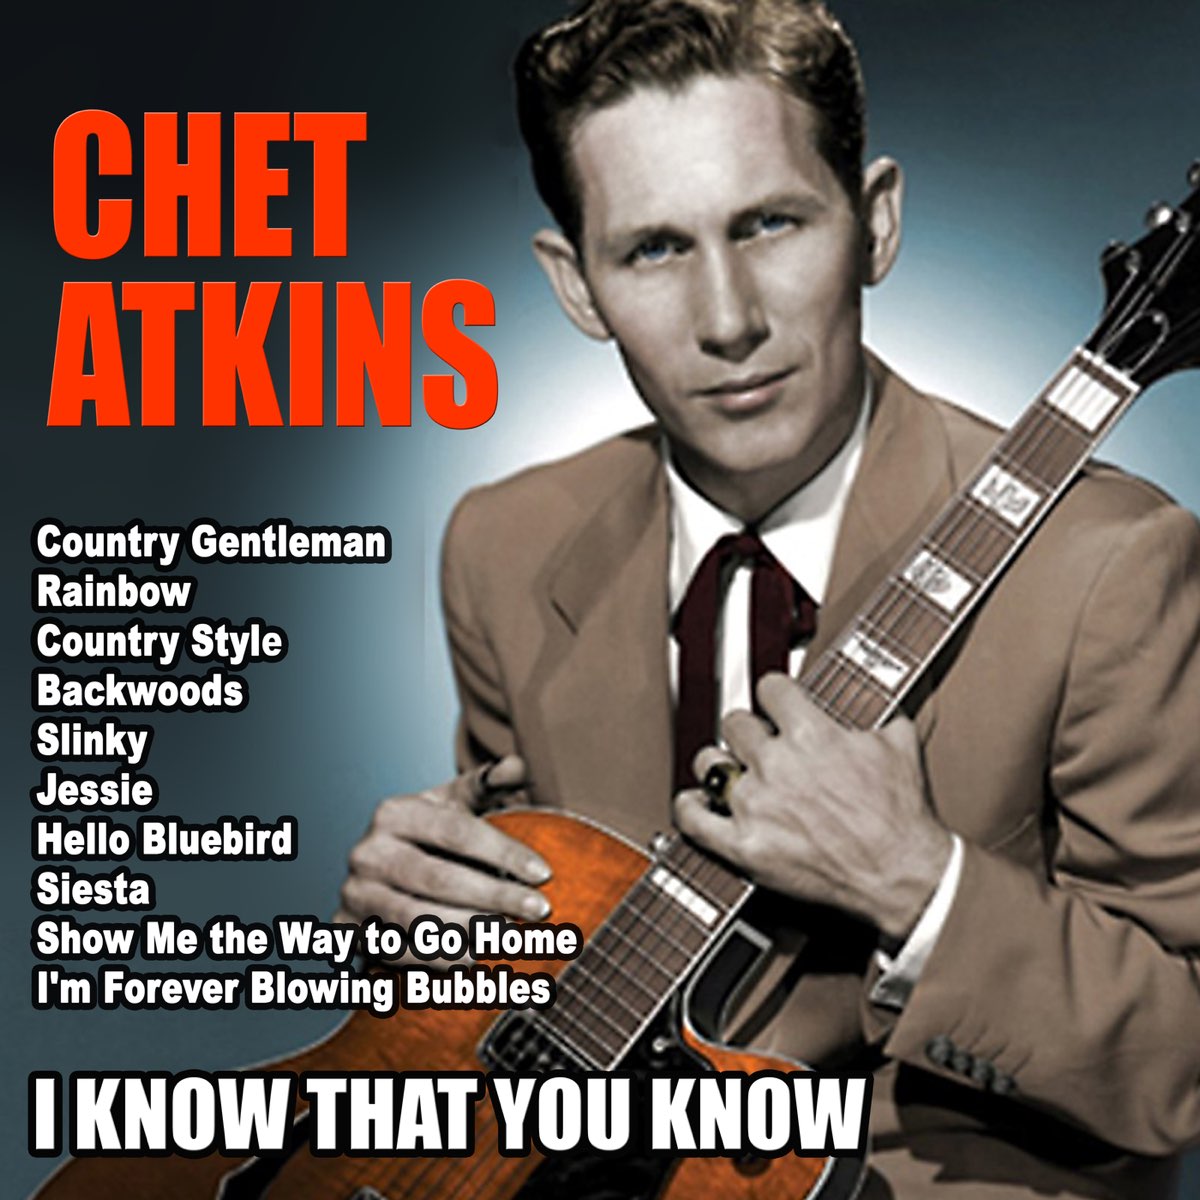 Country gentlemen. Chet Atkins. Gibson chet Atkins Country Gentleman. Chet Atkins фото сидящий. Chet Atkins man of Mystery.